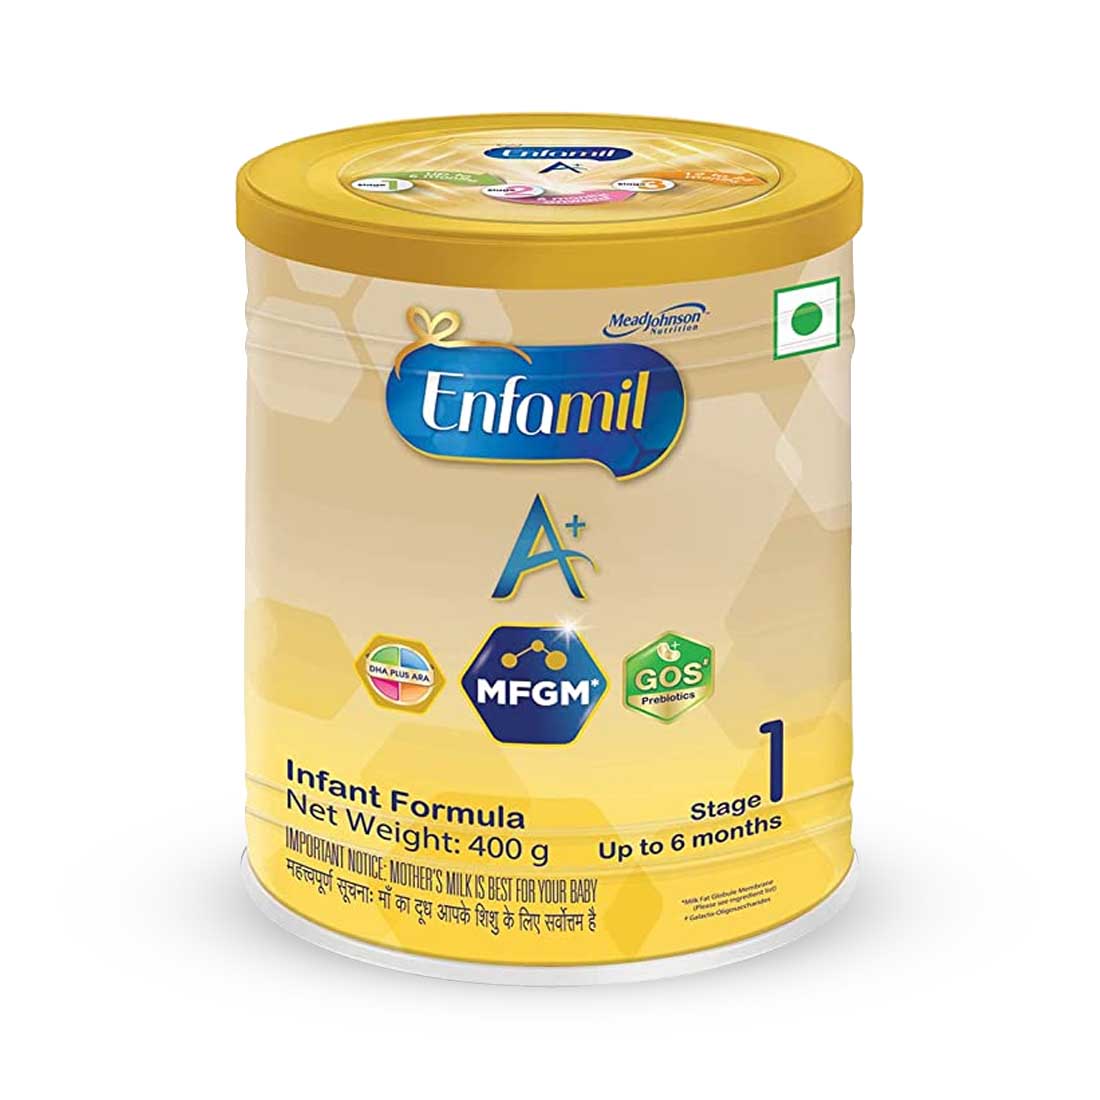 Buy Enfamil A+ Infant Baby Milk Formula, Stage 1 - 400gms (Imported Tin Pack) Online in India at uyyaala.com